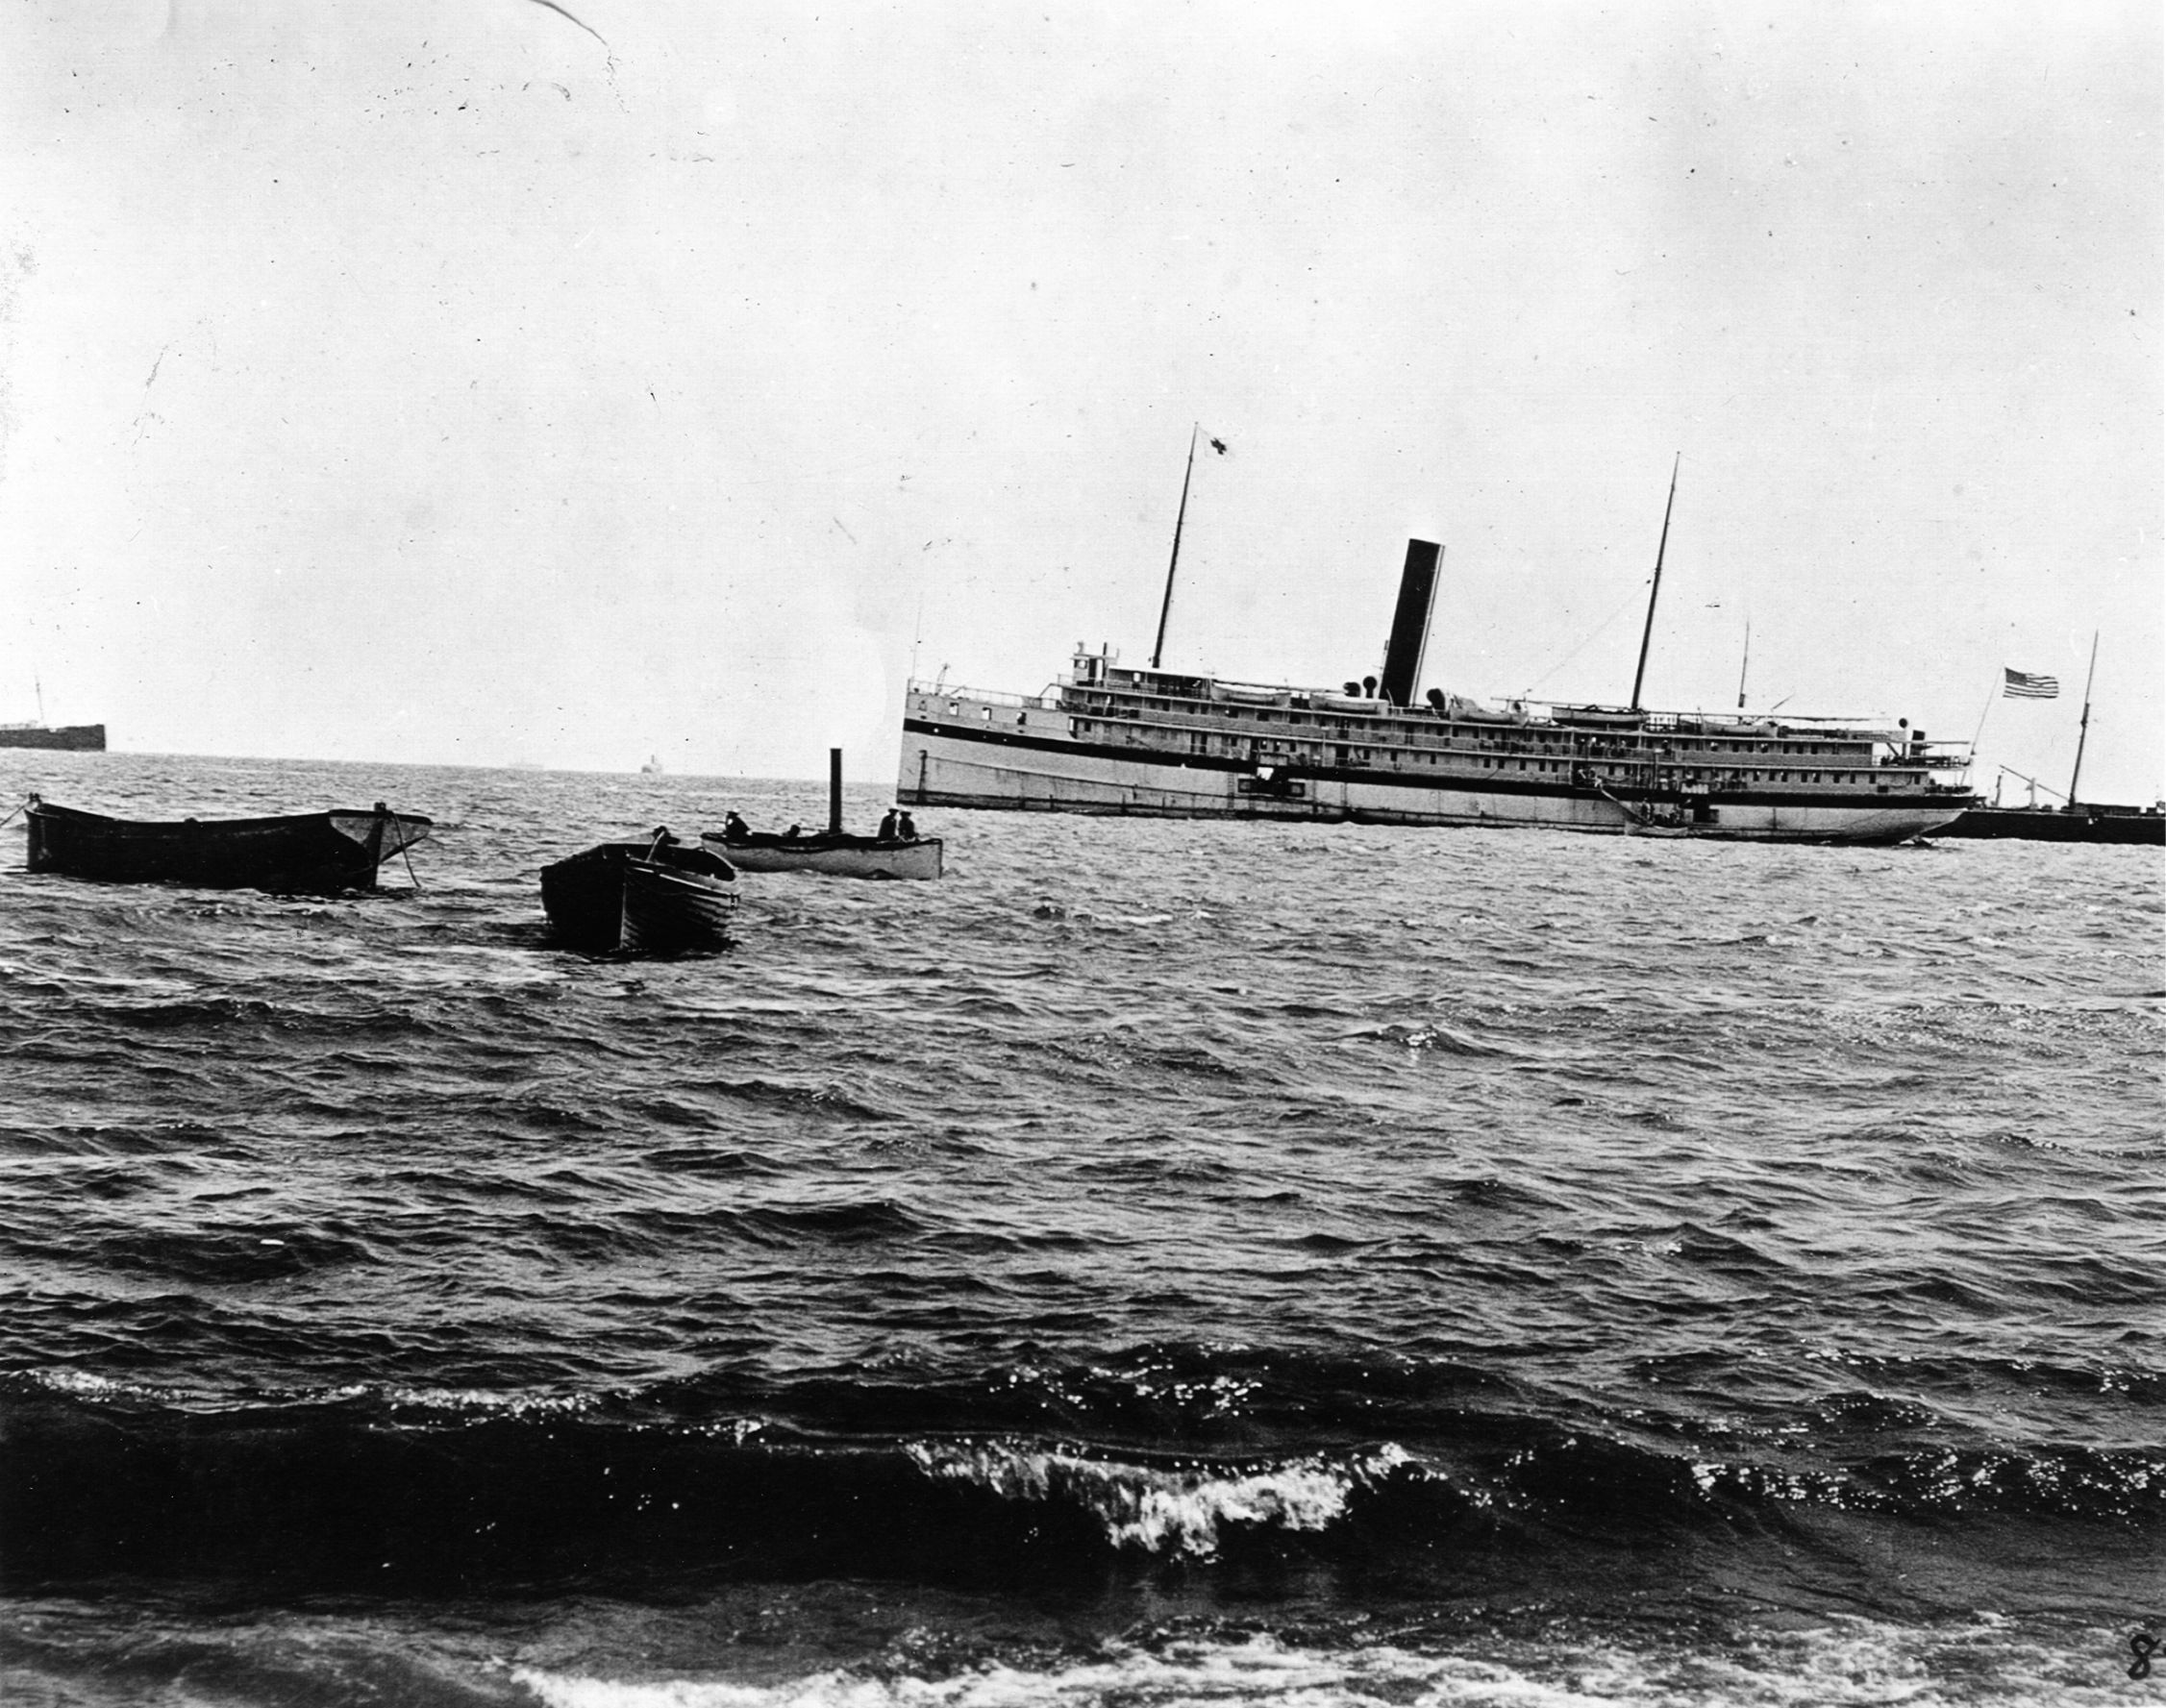 The hospital ship Relief waits off shore for the wounded to arrive. The small ships near the water’s edge brought the men aboard. 